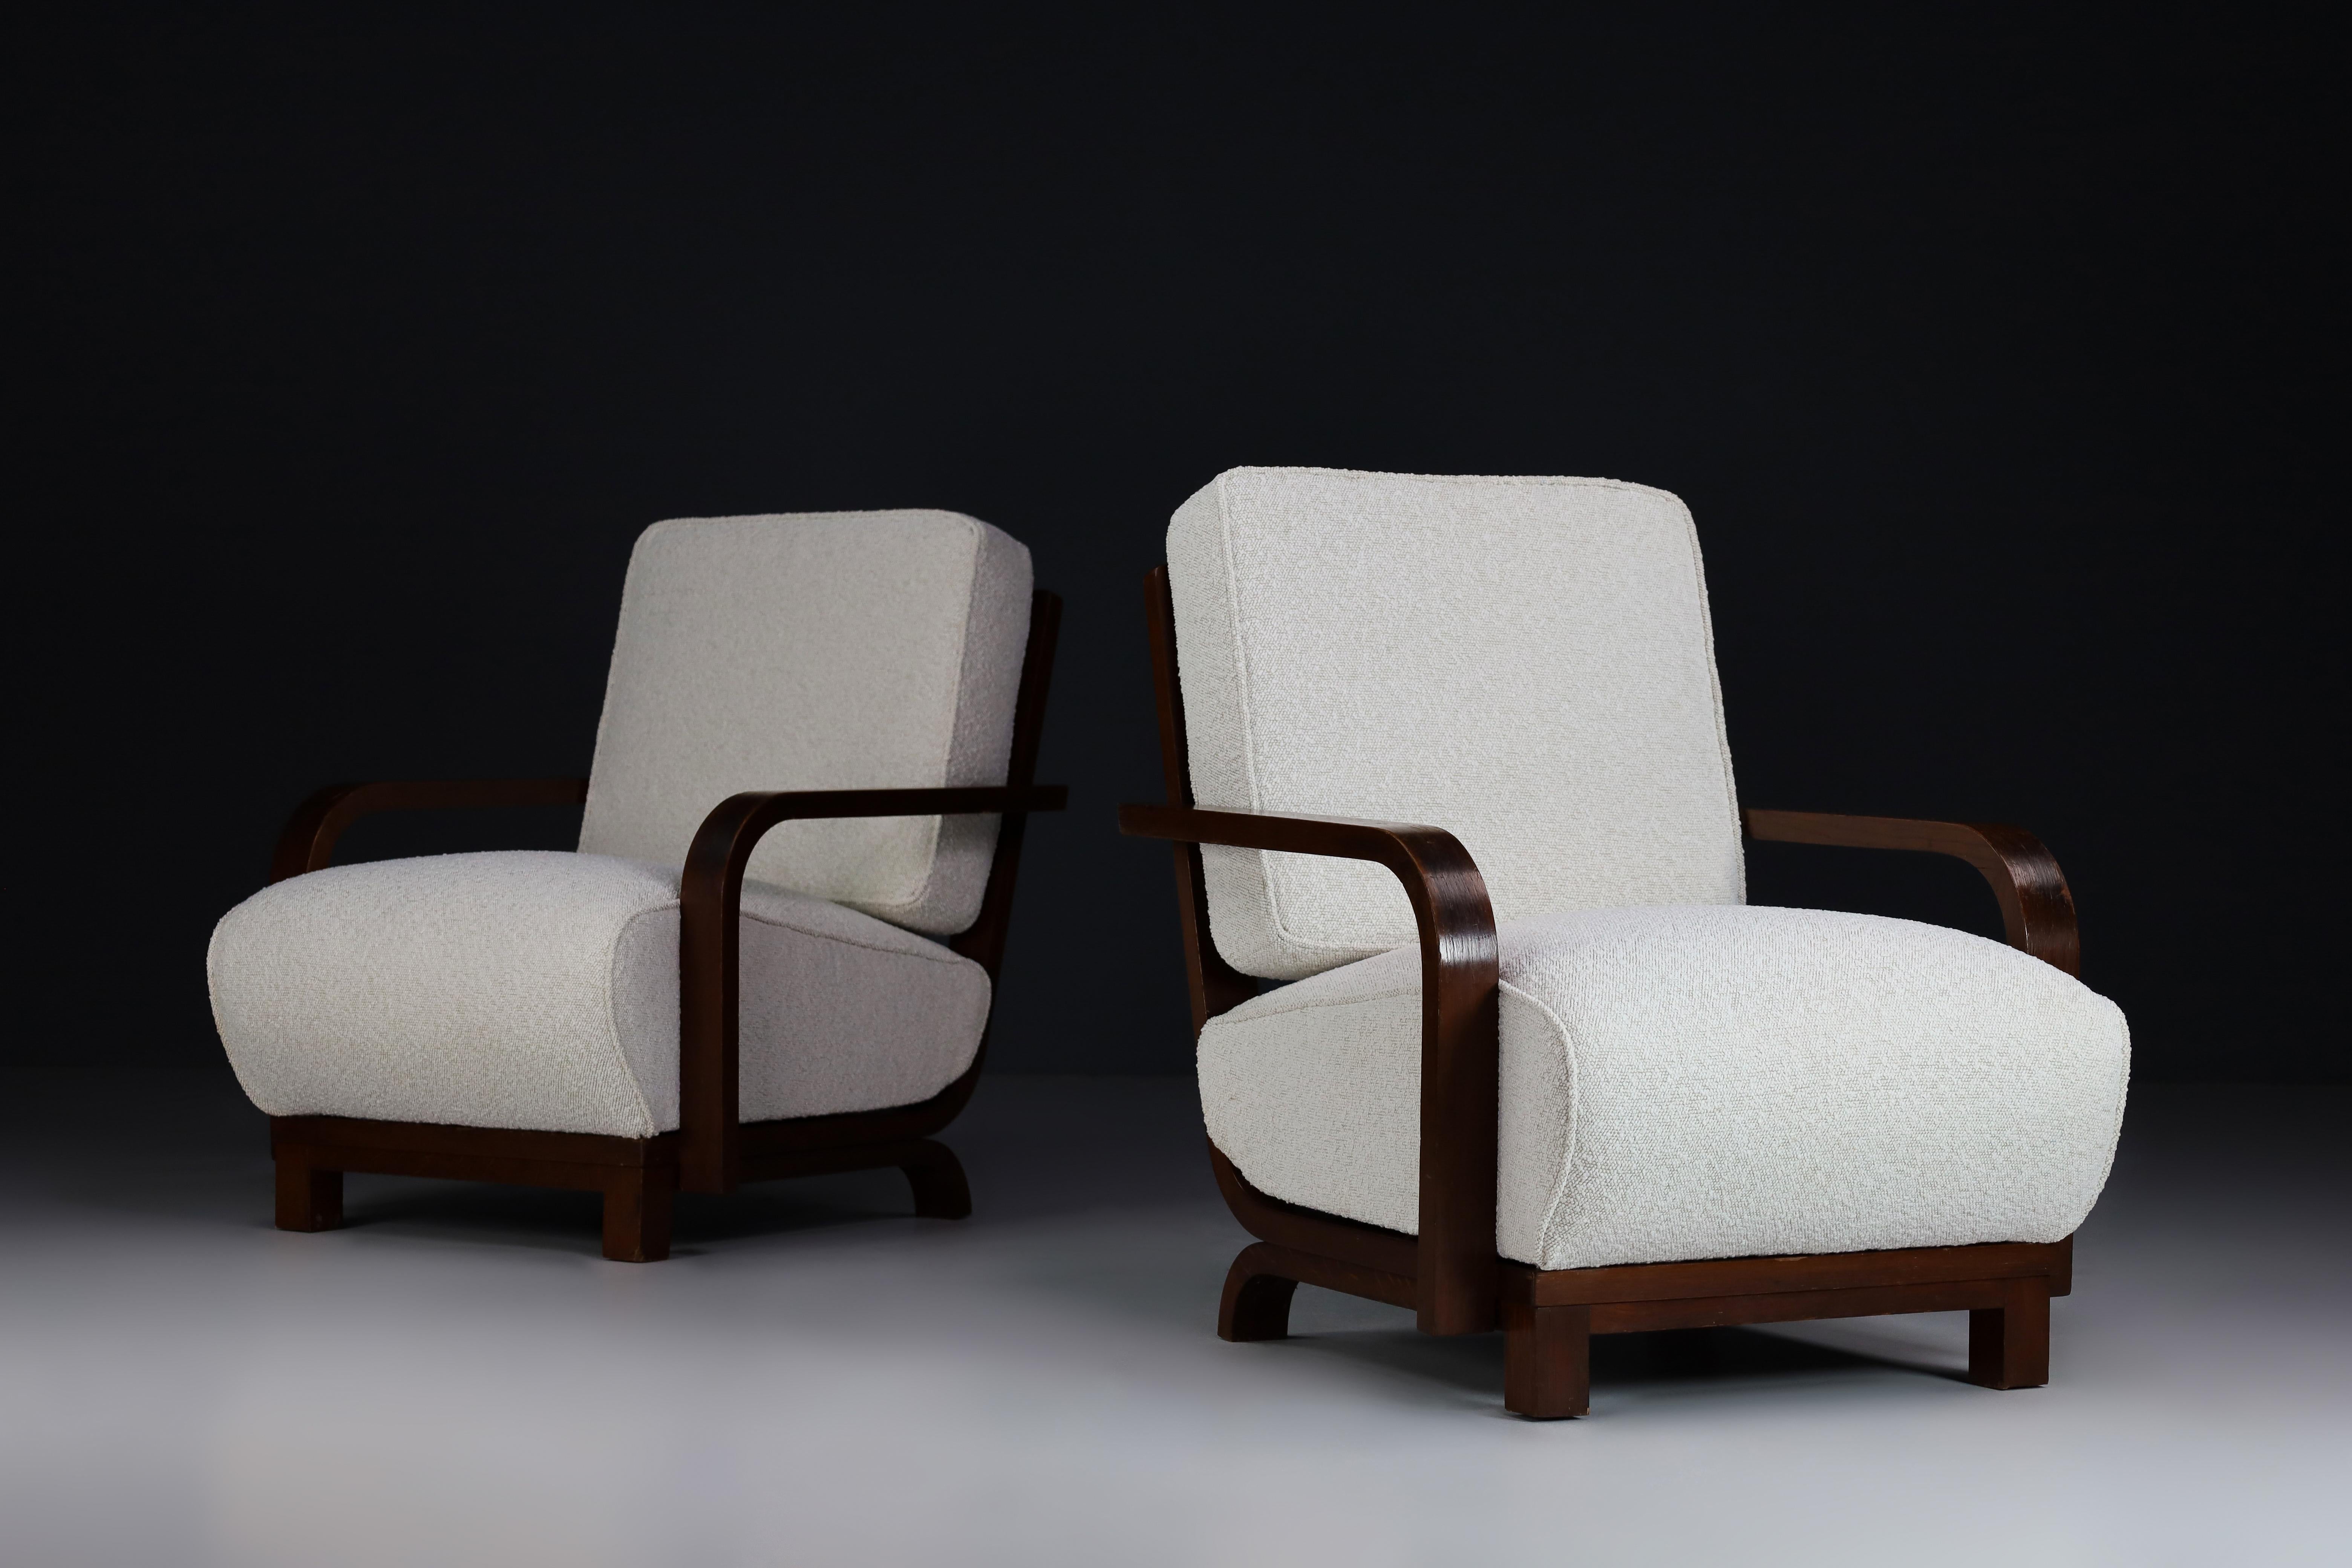 Art Deco armchairs in bentwood and bouclé upholstery, Prague, the 1930s.

Set of two Art Deco armchairs in bentwood and new bouclé upholstery, Czech Republic 1930s. These lounge chairs would make an eye-catching addition to any interior, such as a